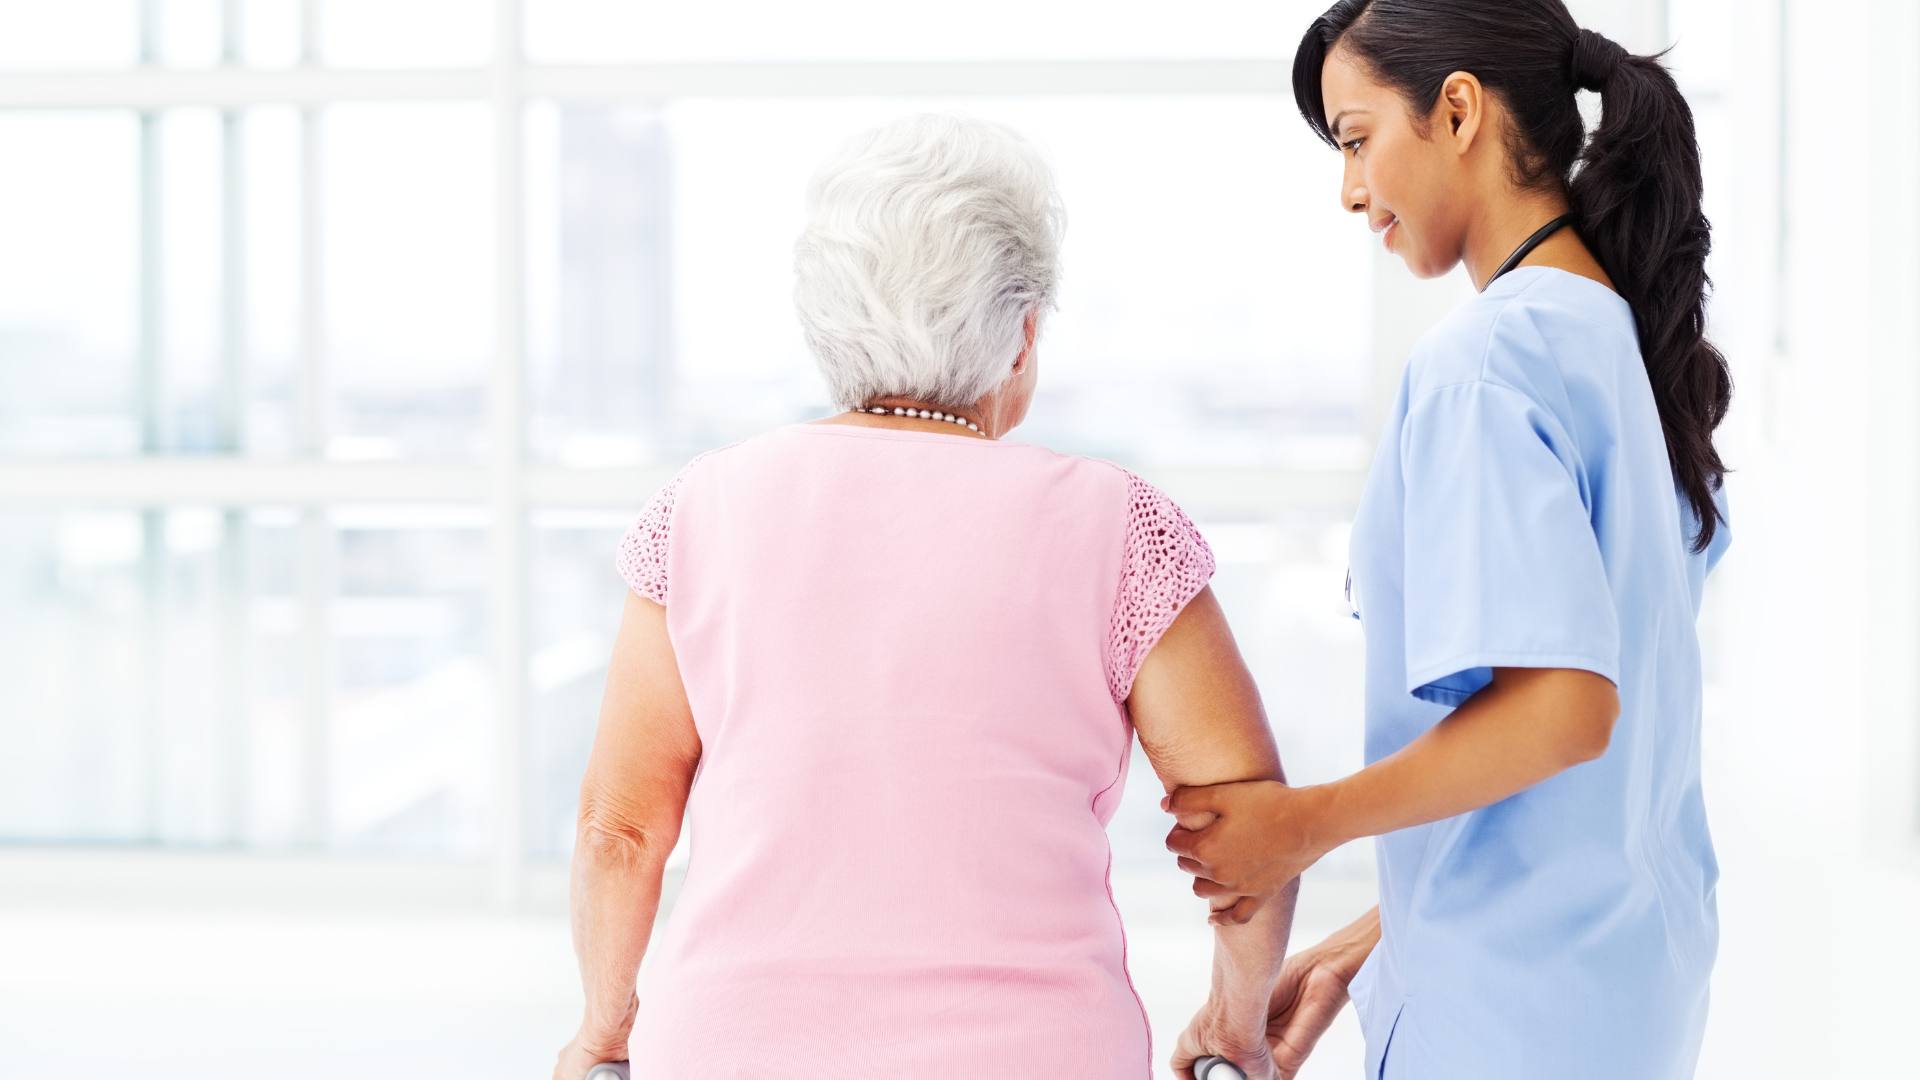 A heartwarming image of an LPN helping an elderly patient in a nursing home. This image demonstrates the importance of nursing home jobs for LPNs.